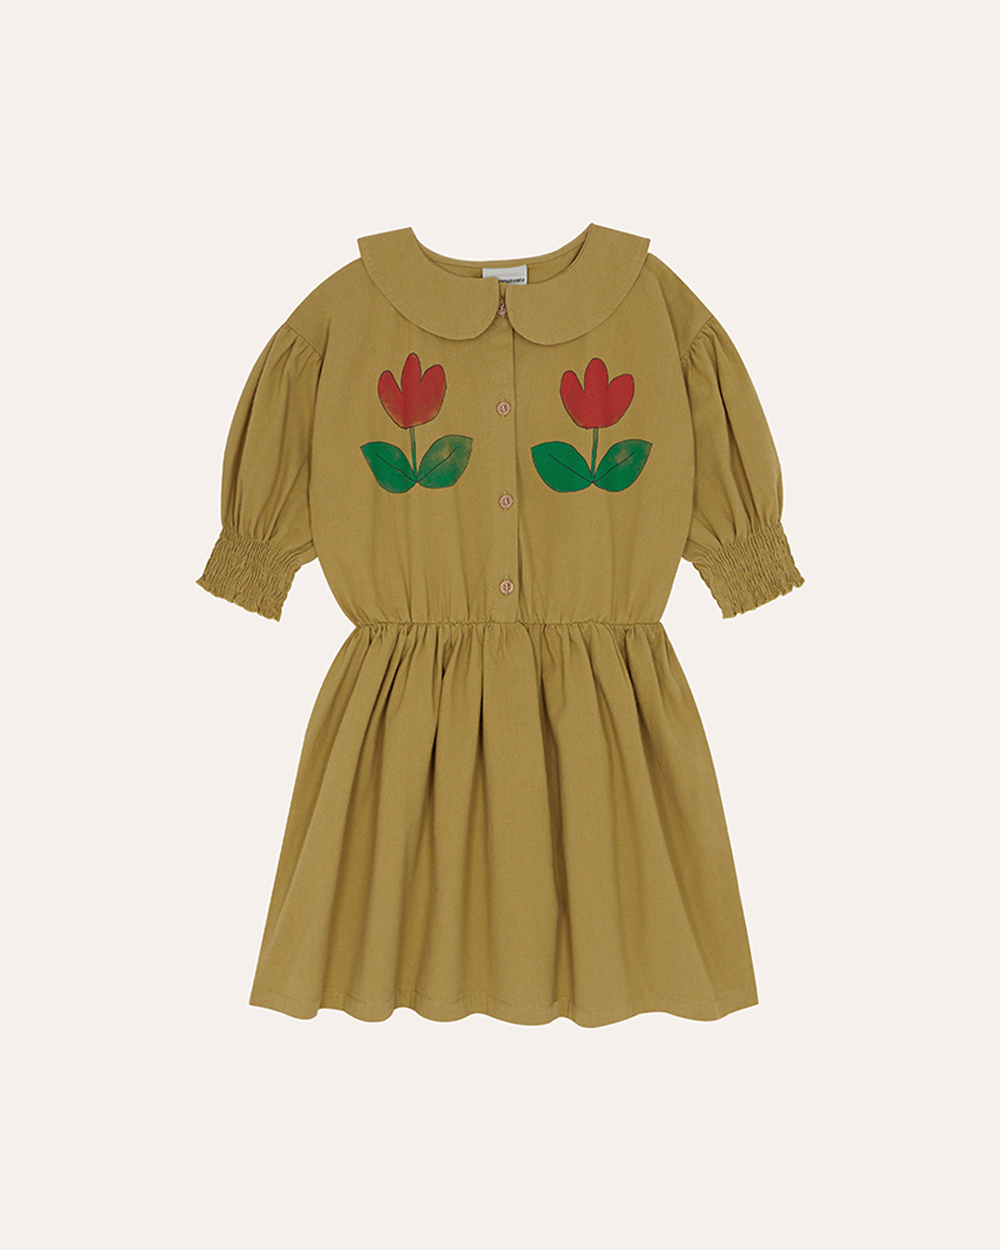 [ THE CAMPAMENTO ] TULIPS SHORT SLEEVES KIDS DRESS